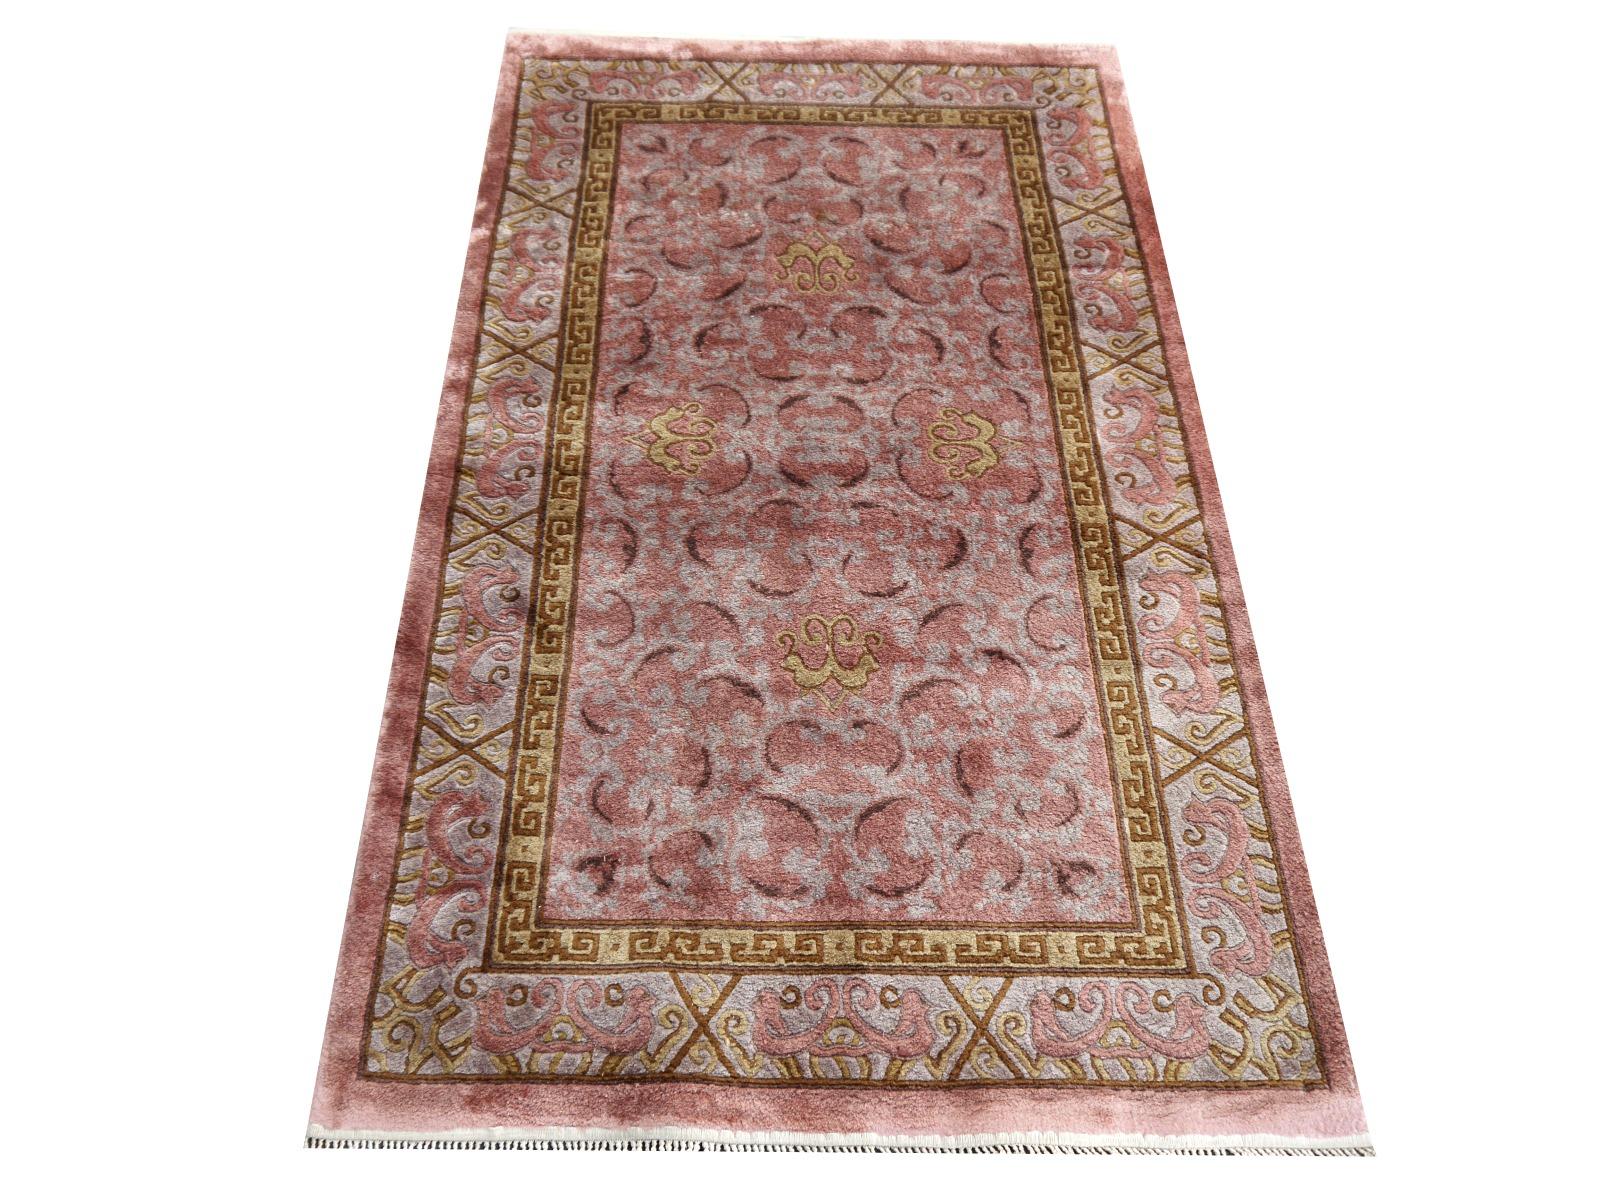 Vintage Silk Chinese Rug with Khotan Design & Style
A stunning semi antique silk rug.
Design: Khotan
Collection: Vintage and antique rugs by Djoharian Collection
Size: 155 x 93 cm / 5.0 x 3.0 ft plus fringes / tassels. 
Materials: 100% pure natural